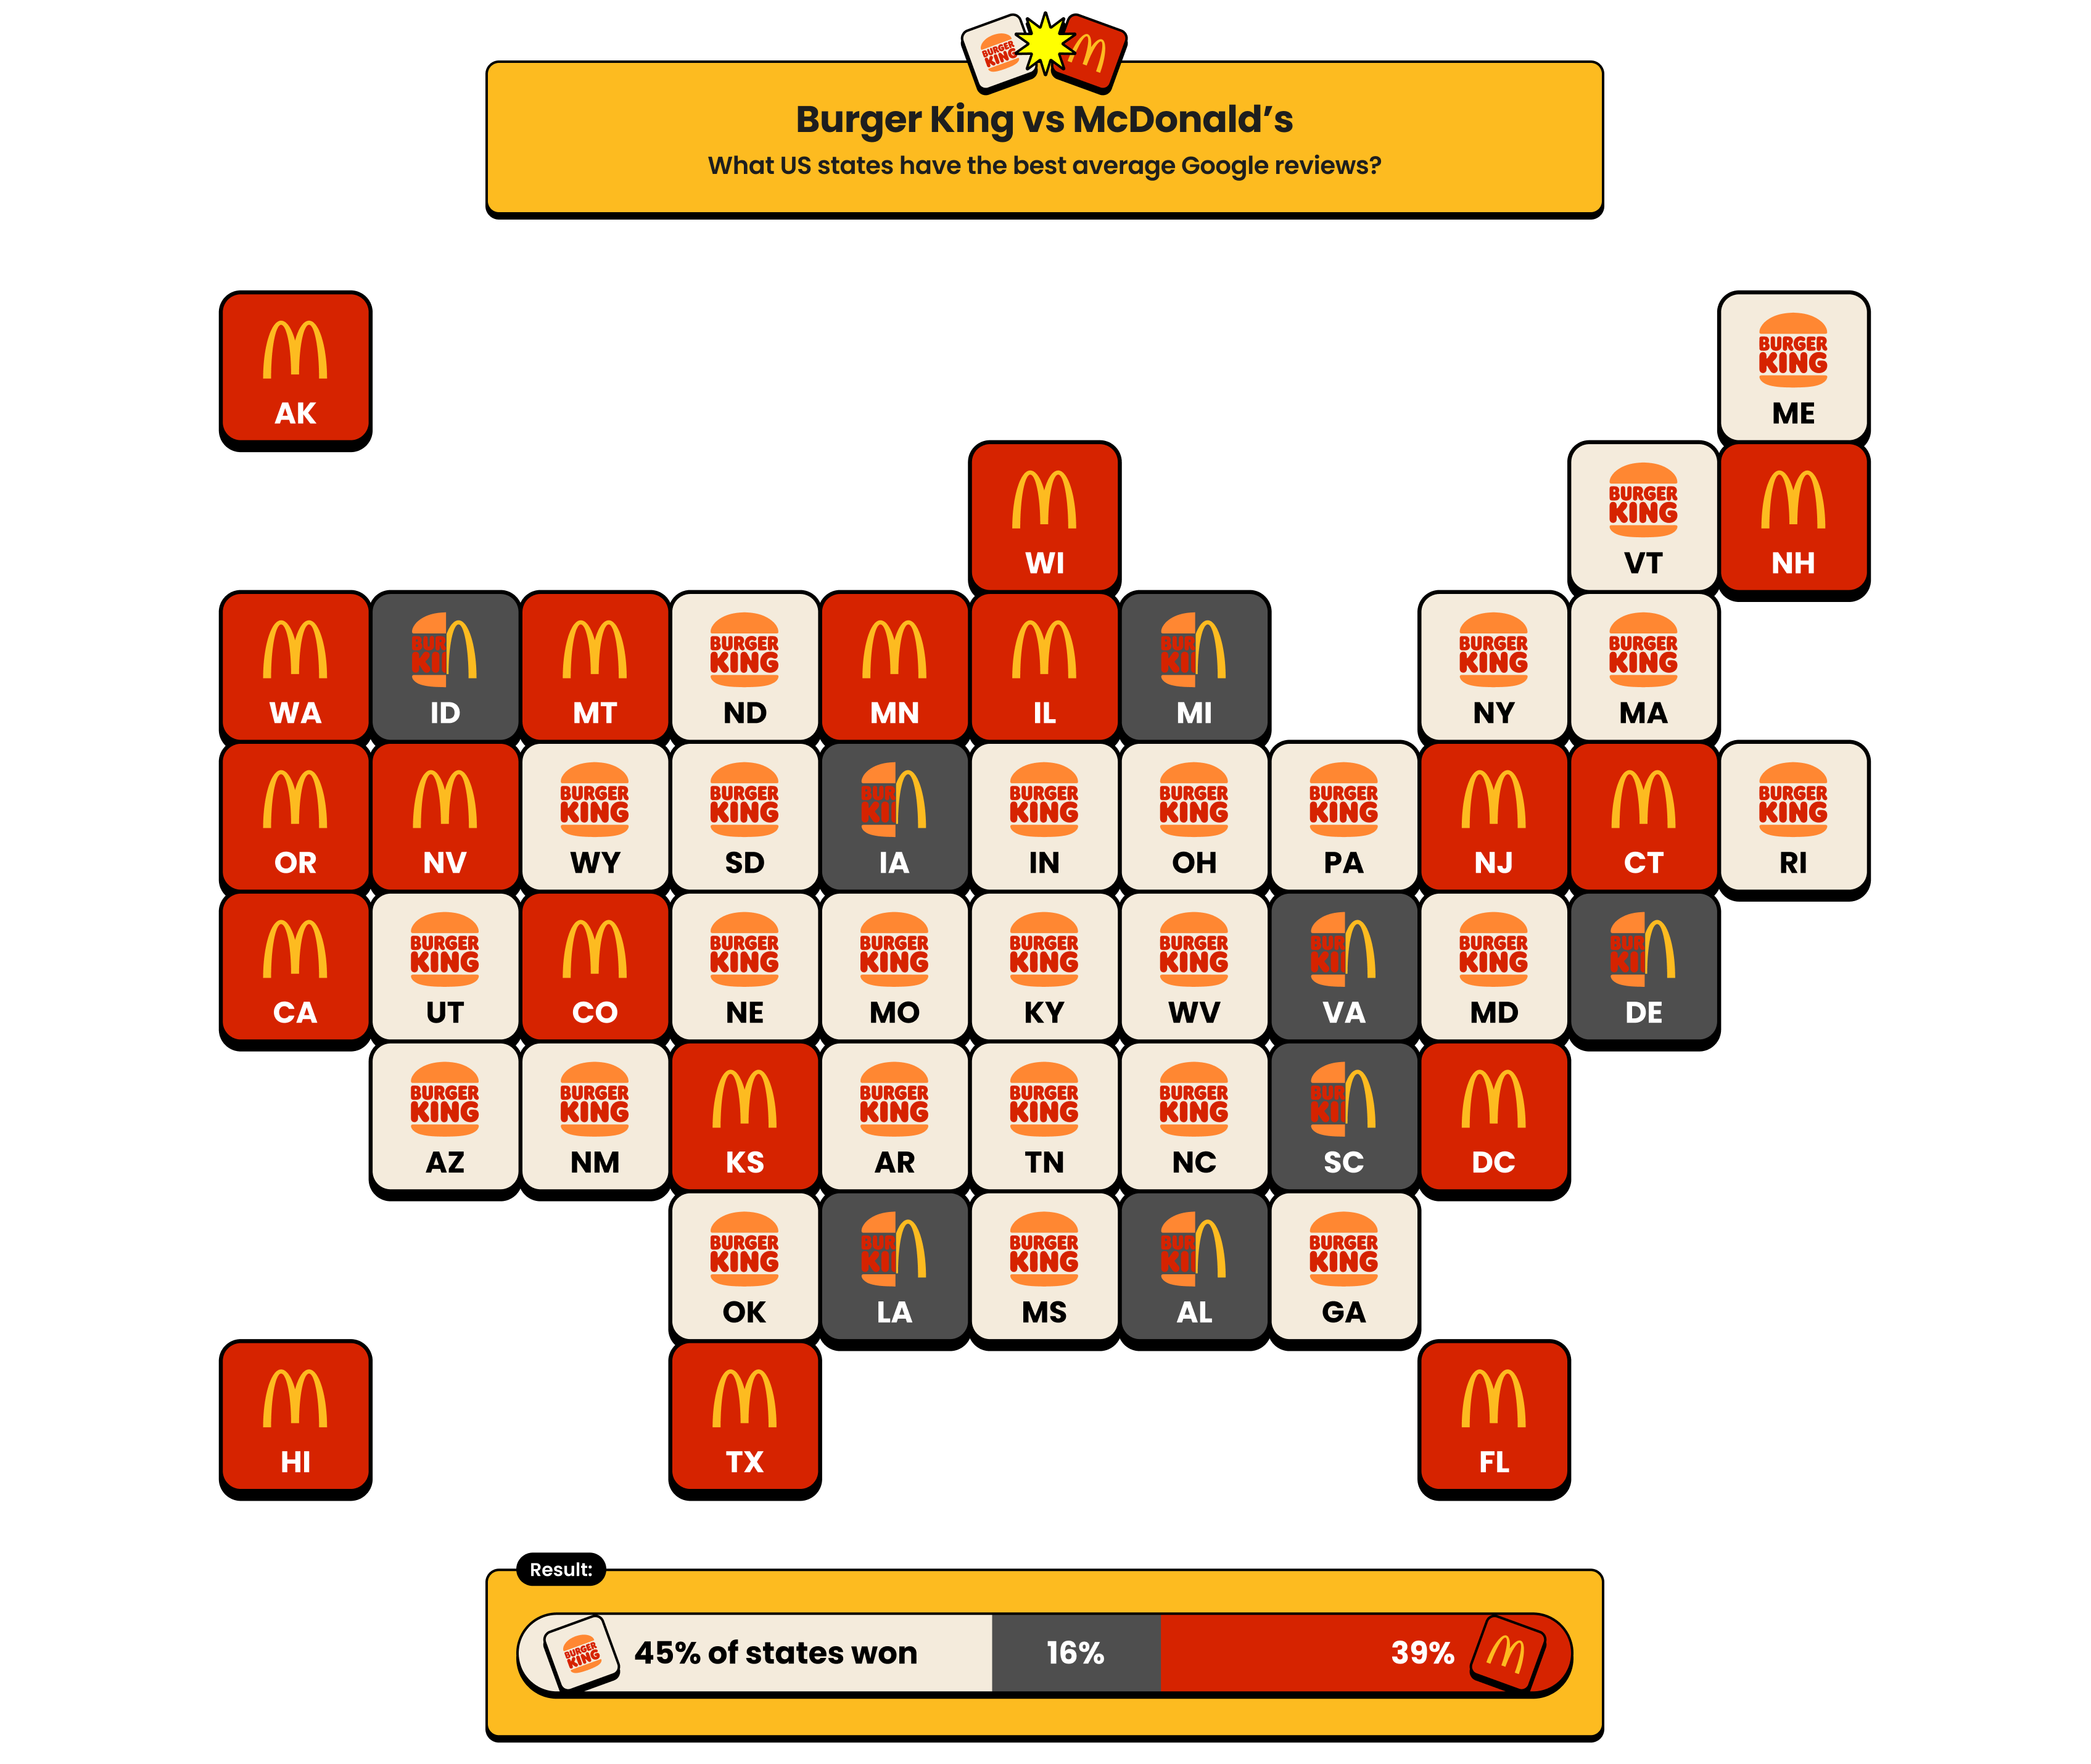 Burger King vs. McDonald's: Highest review rating by state